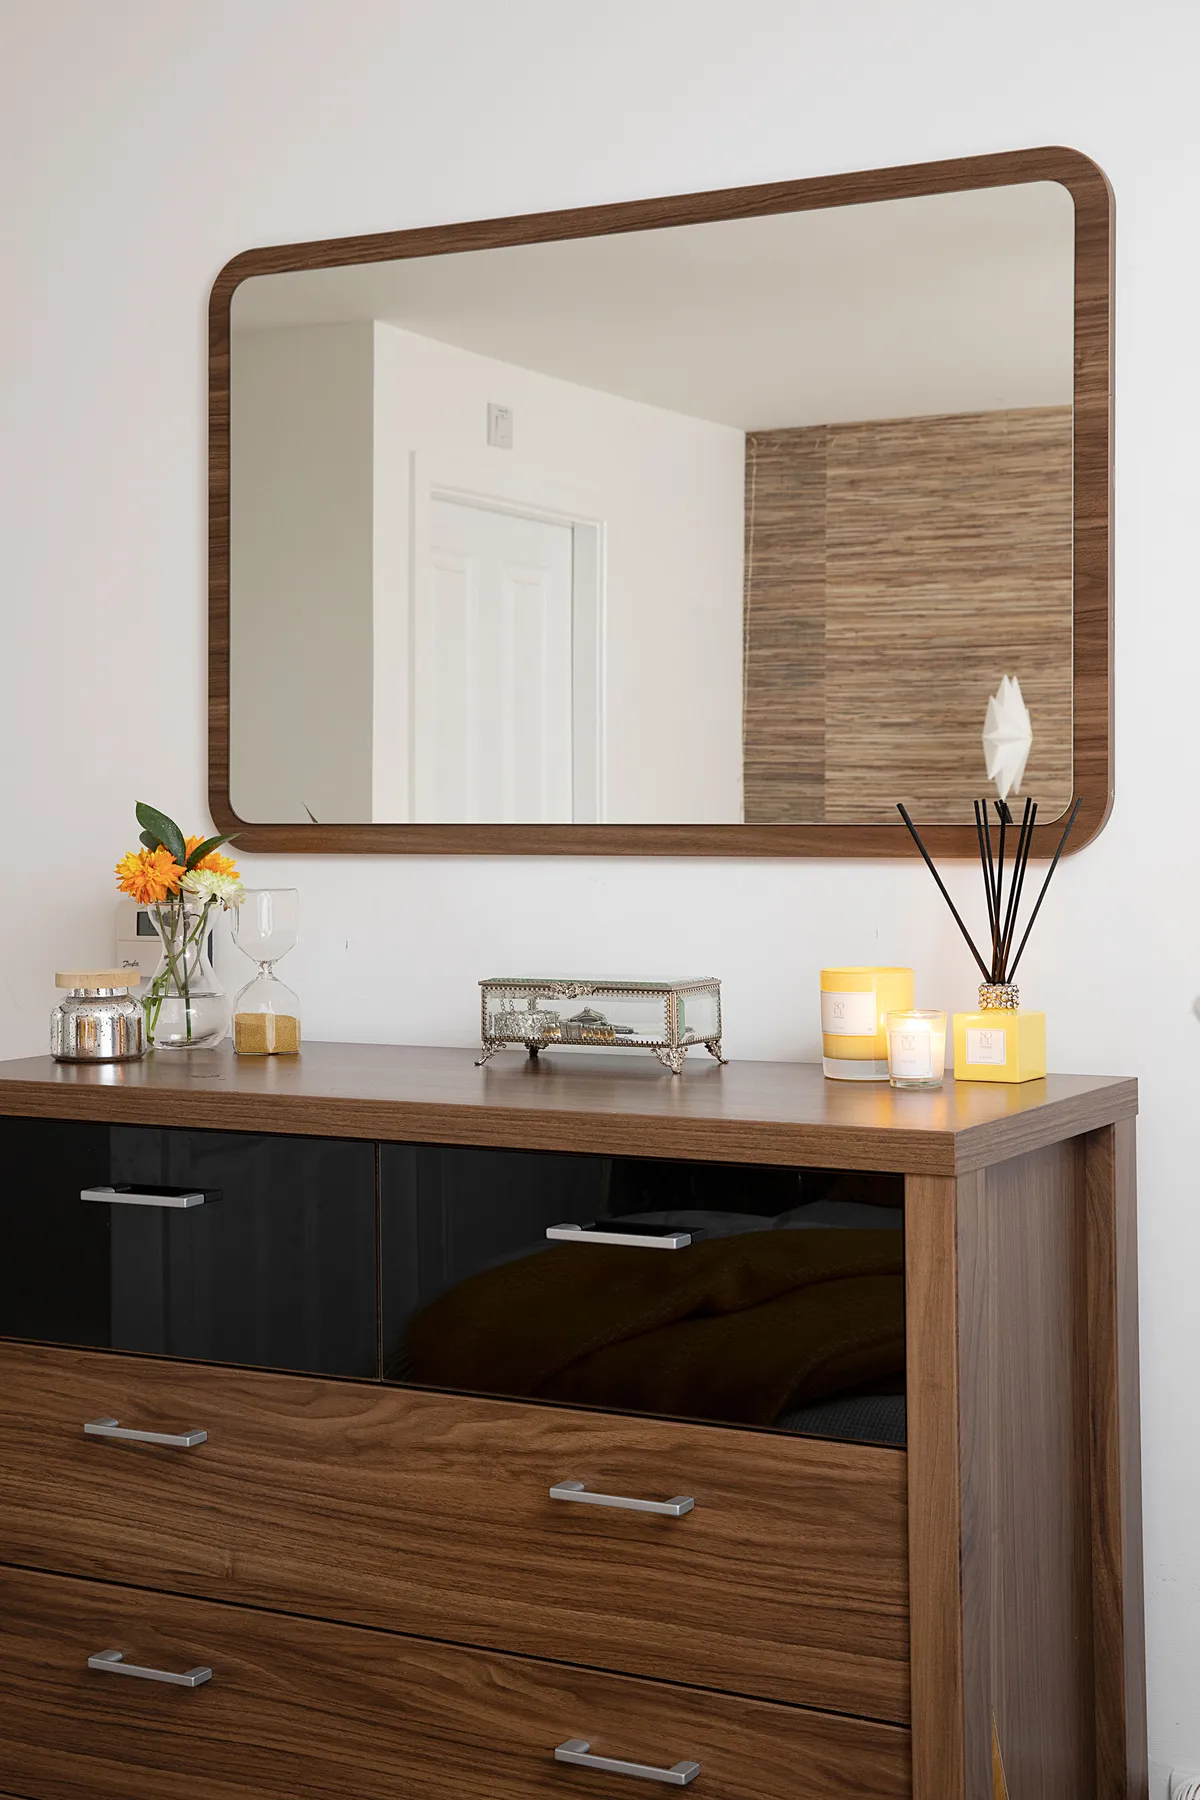 To be savvy with the space, Zillah has doubled up her chest of drawers as both essential storage and a dressing table